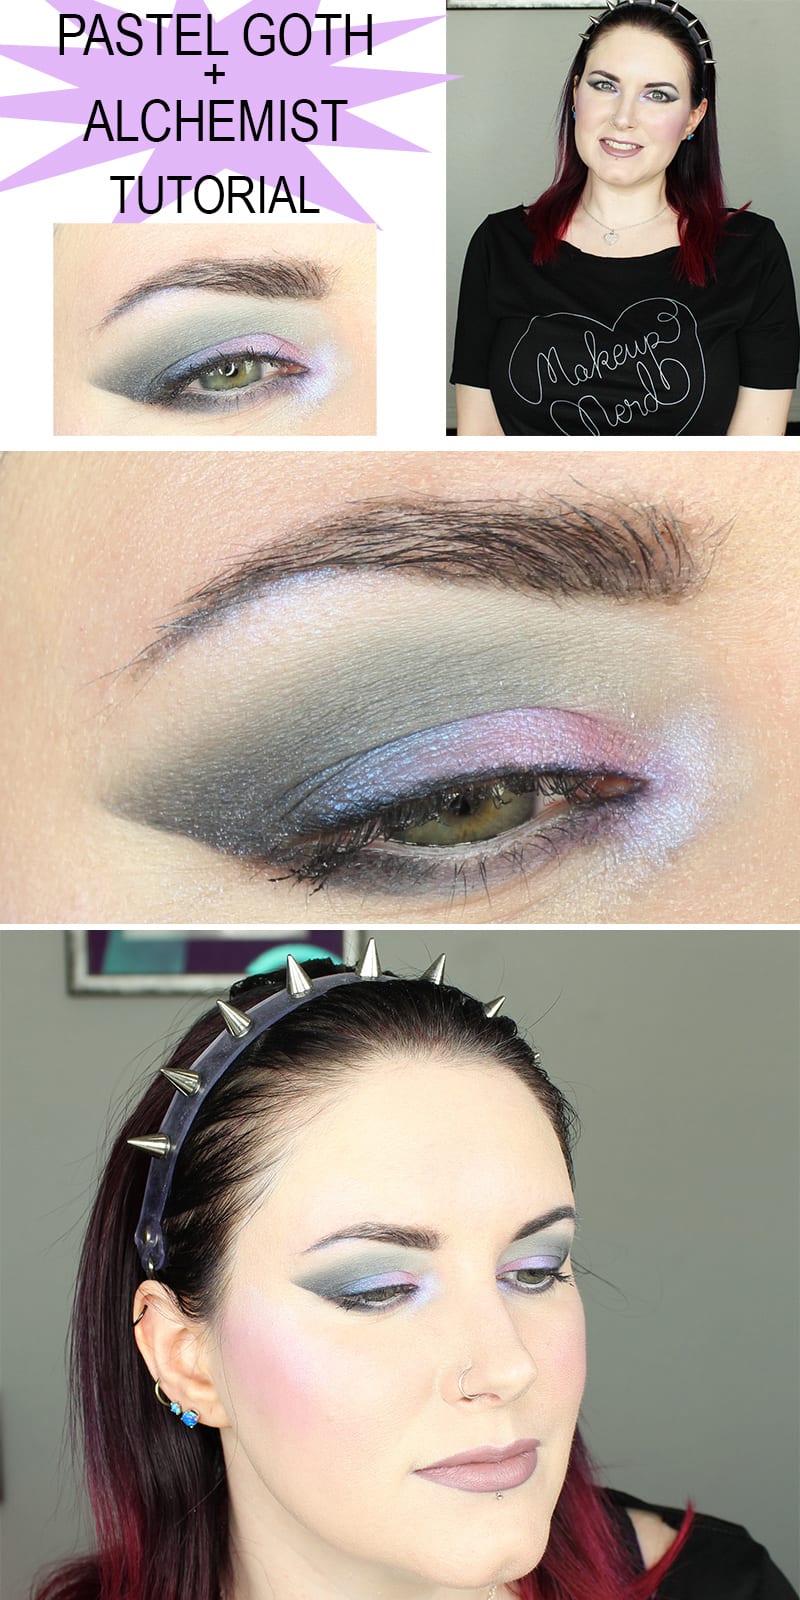 Steal It: Smashbox Cream Eye Liner Palette - Musings of a Muse